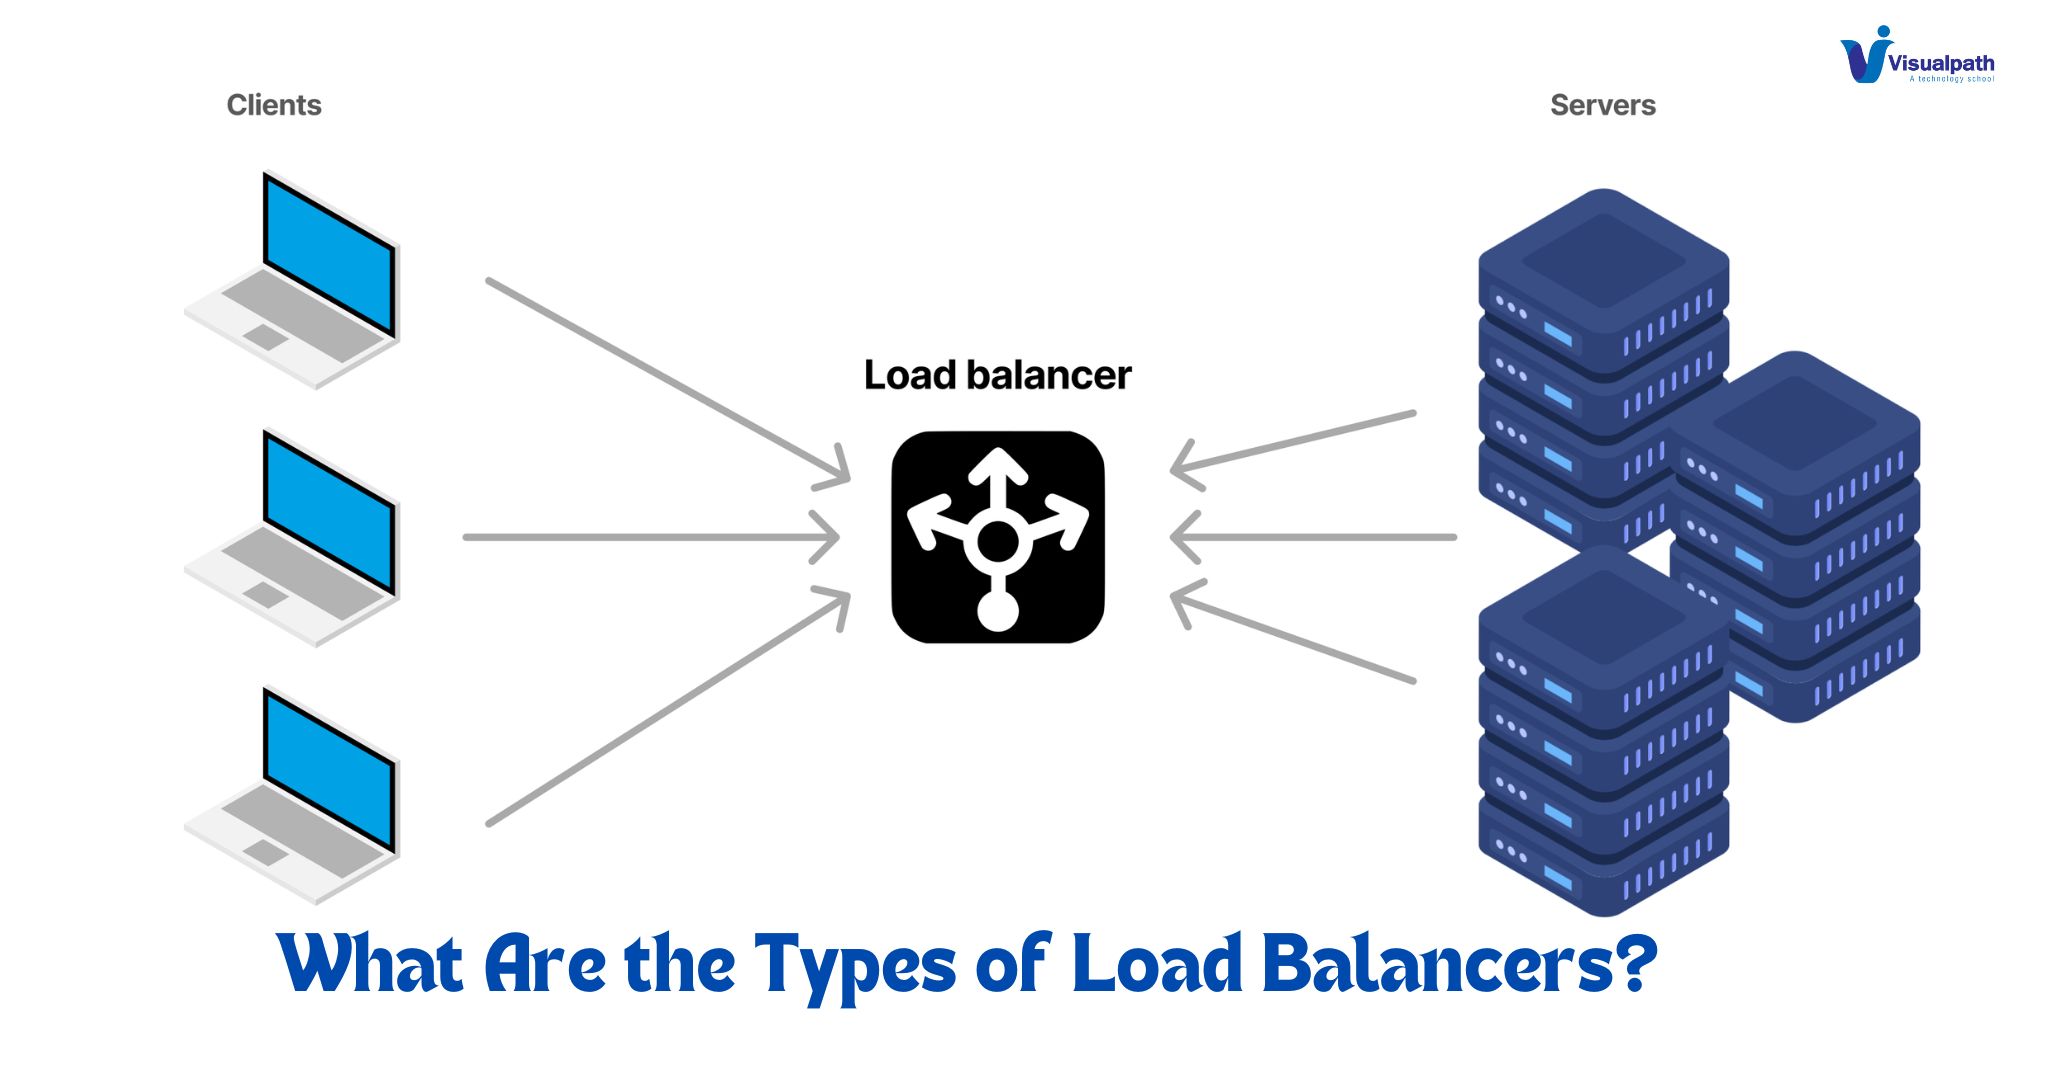 What Are the Types of Load Balancers?